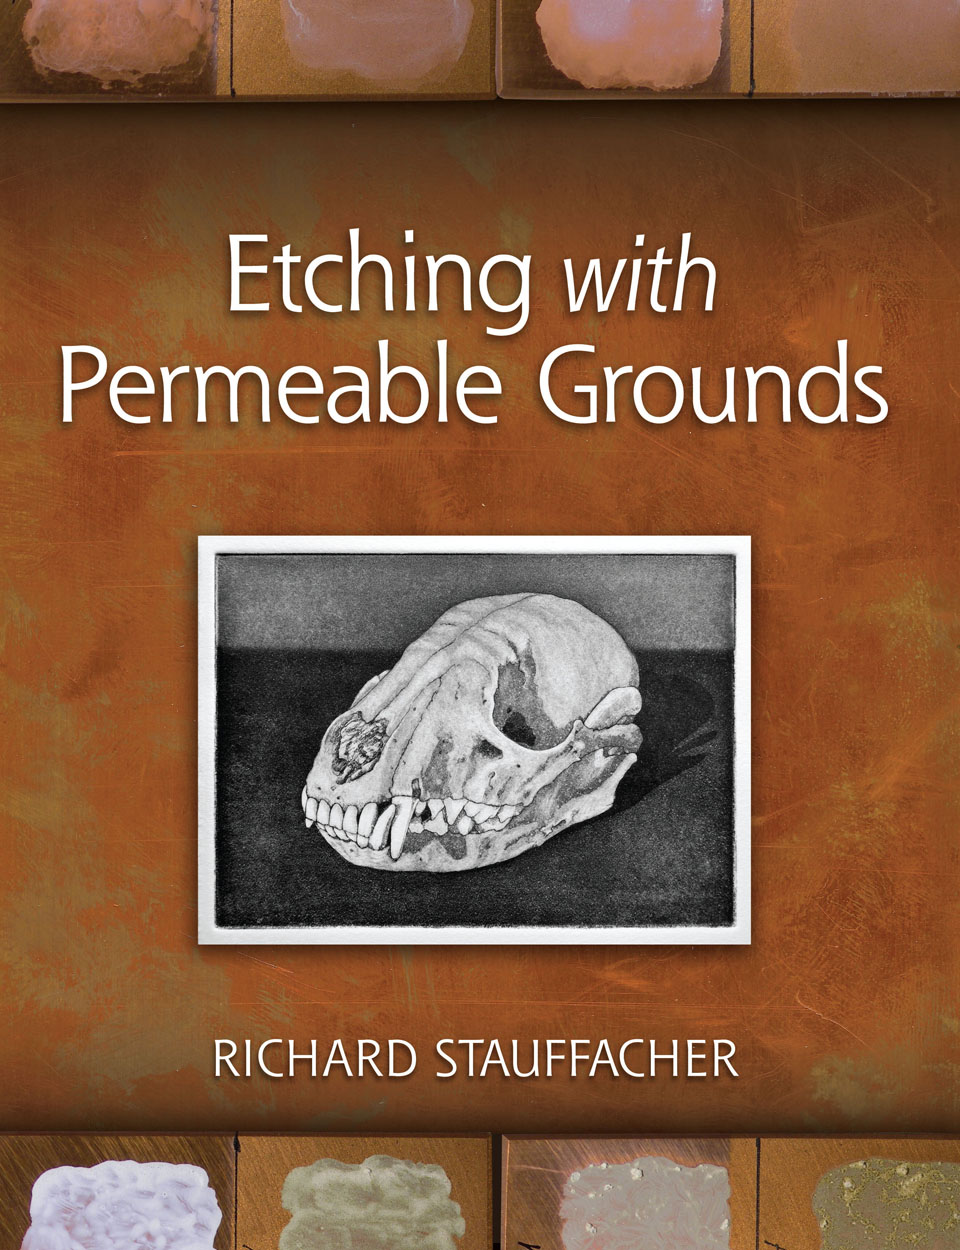 Etching with Permeable Grounds